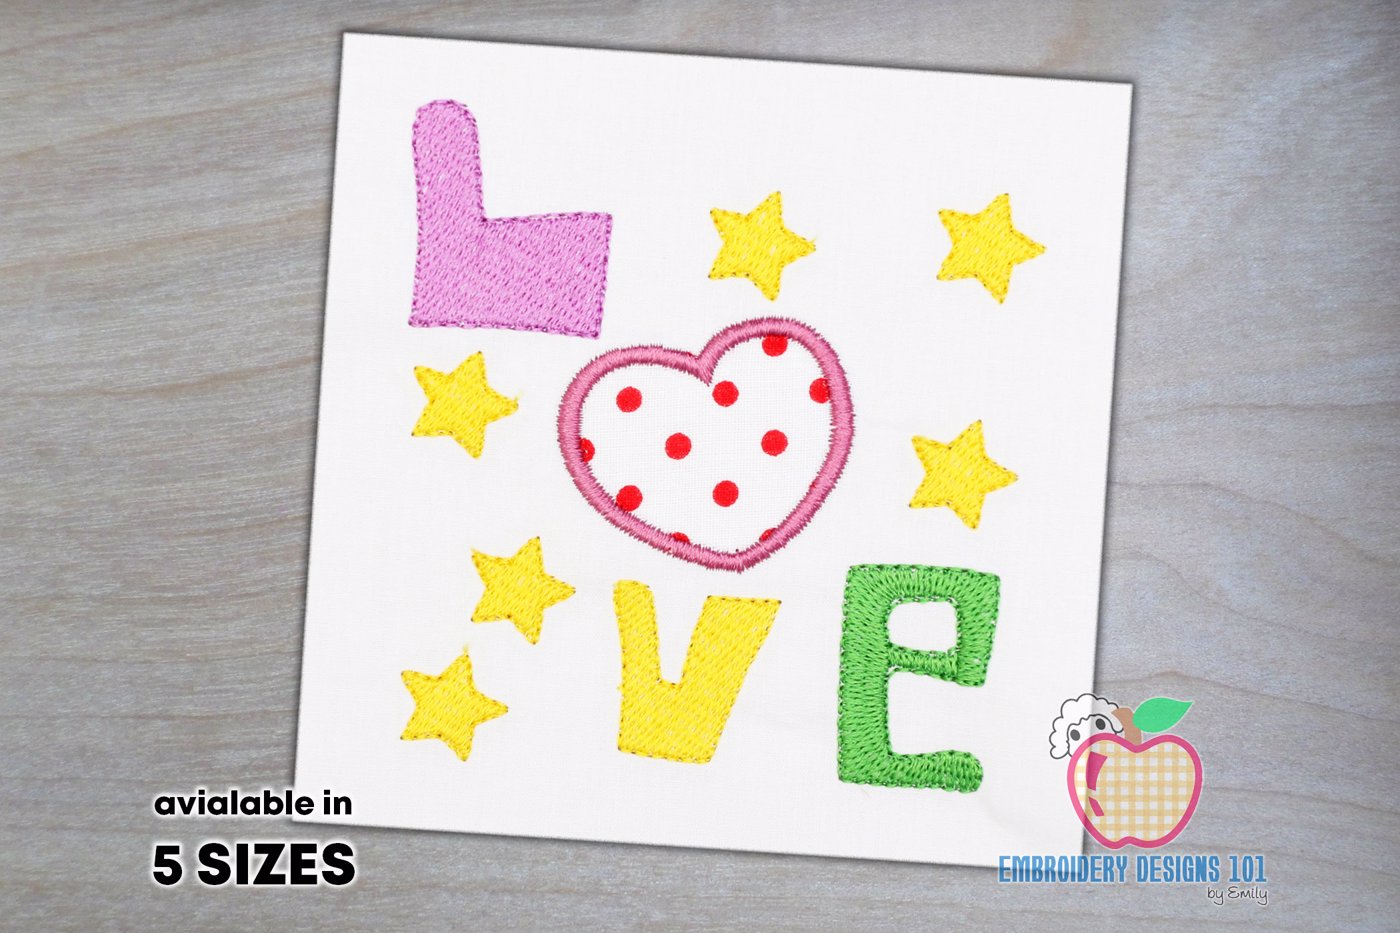 Love Text with Heart and Star Applique